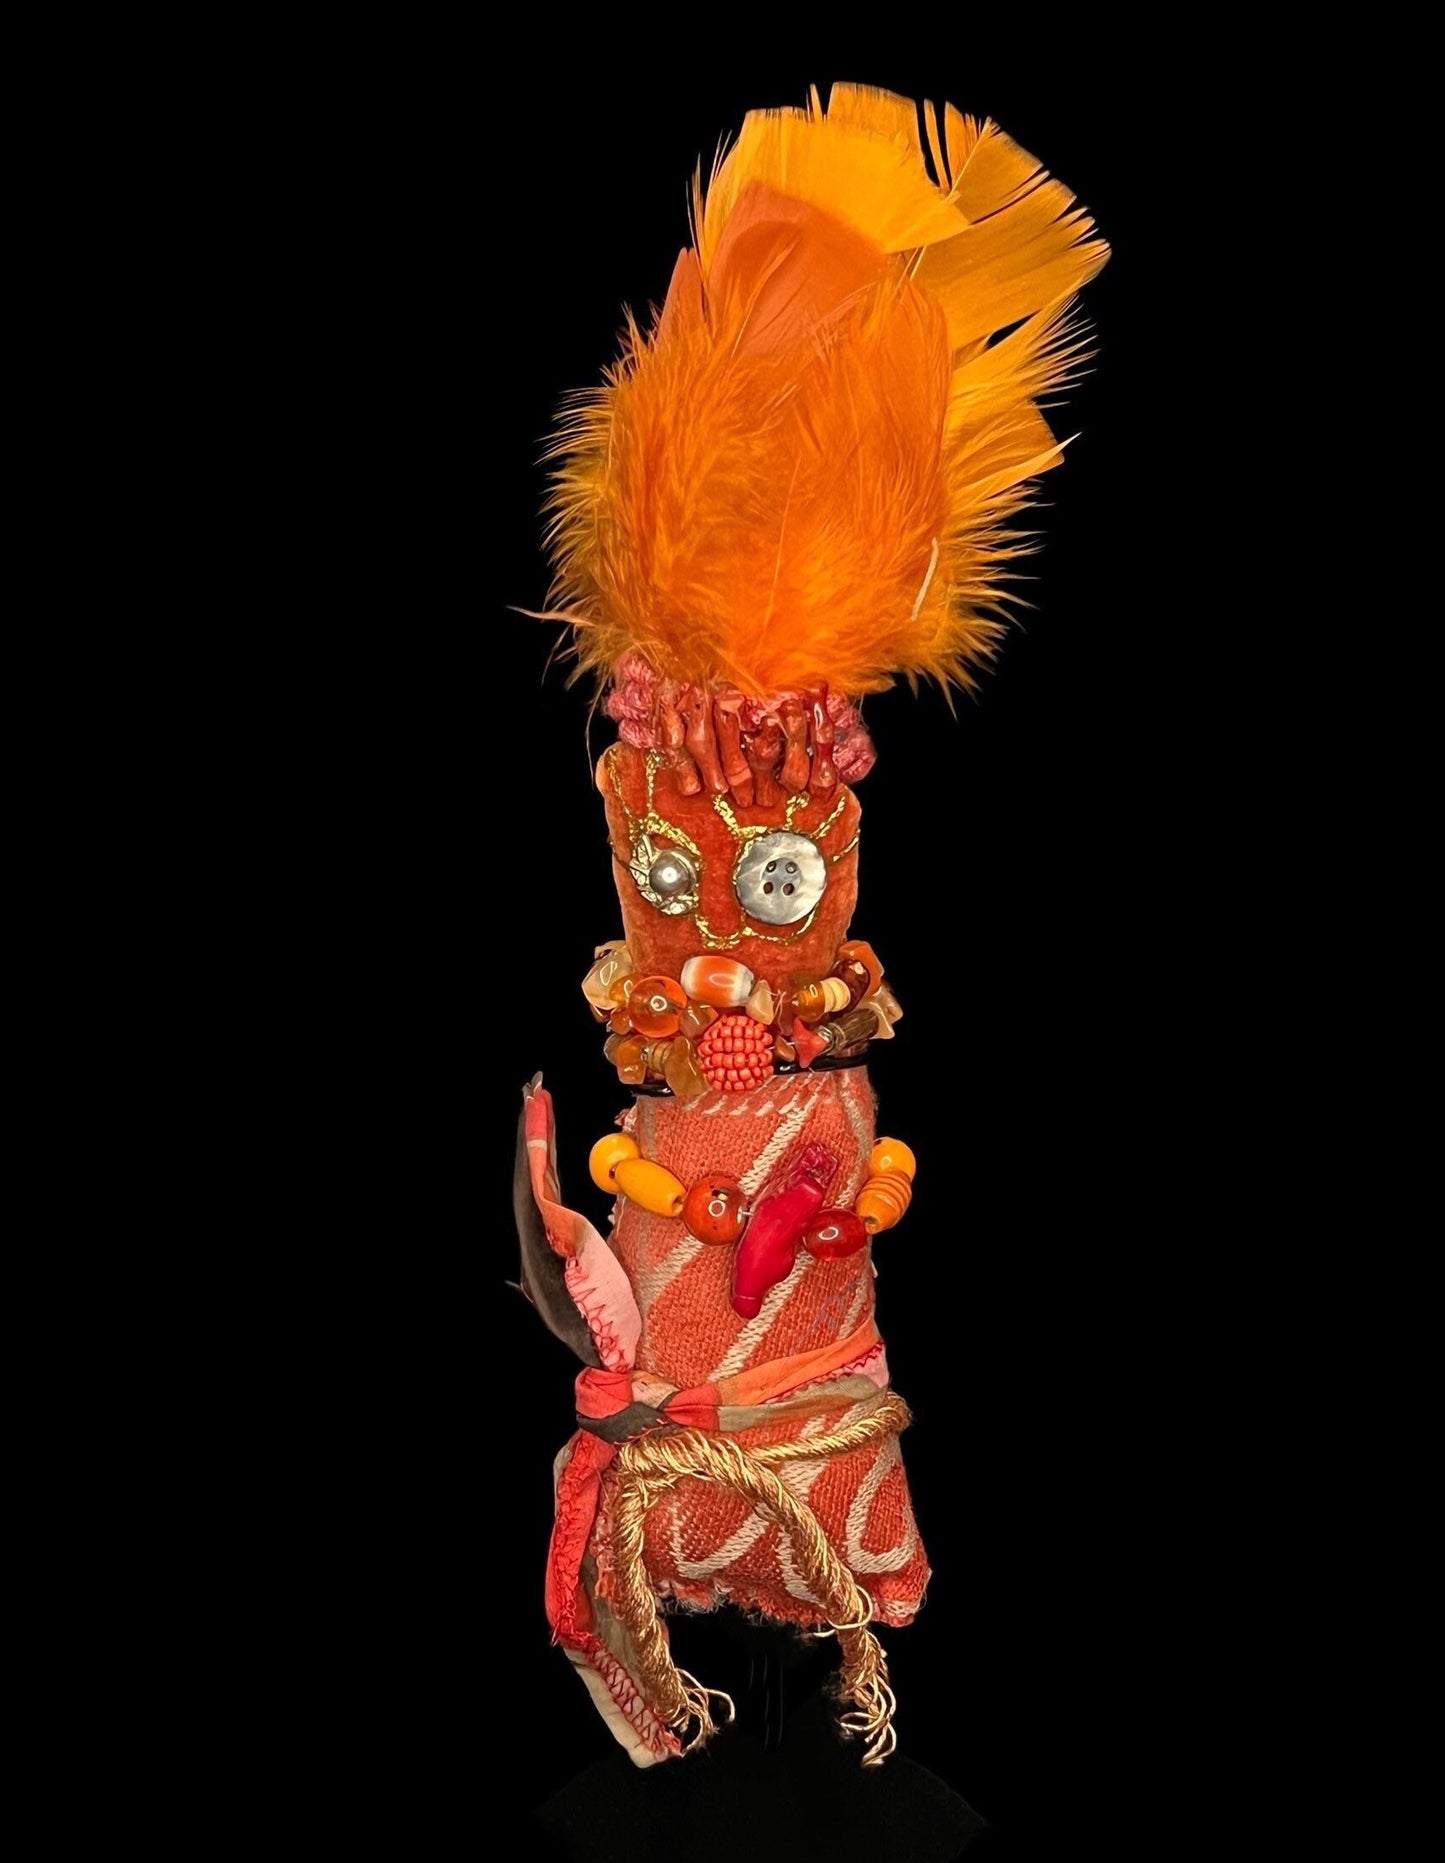 Handcrafted New Orleans Voodoo Doll + Road Opener + JuJu + Cleansed and Blessed + Poppet + Sells for More in Galleries!